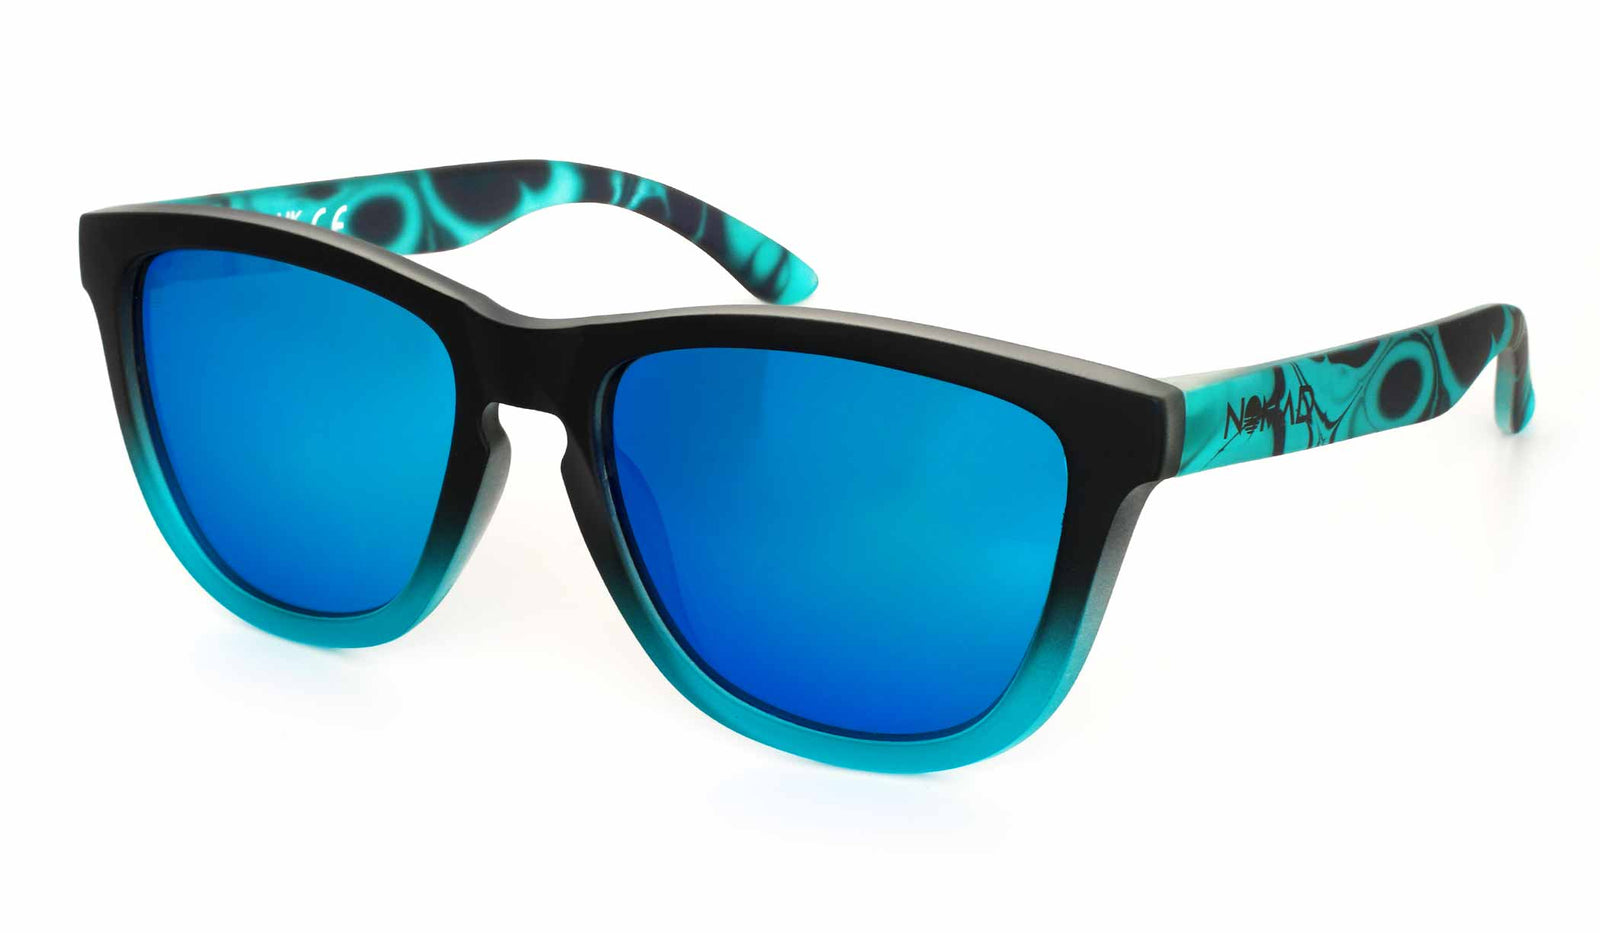 Floating Sunglasses, Recycled Sunglasses